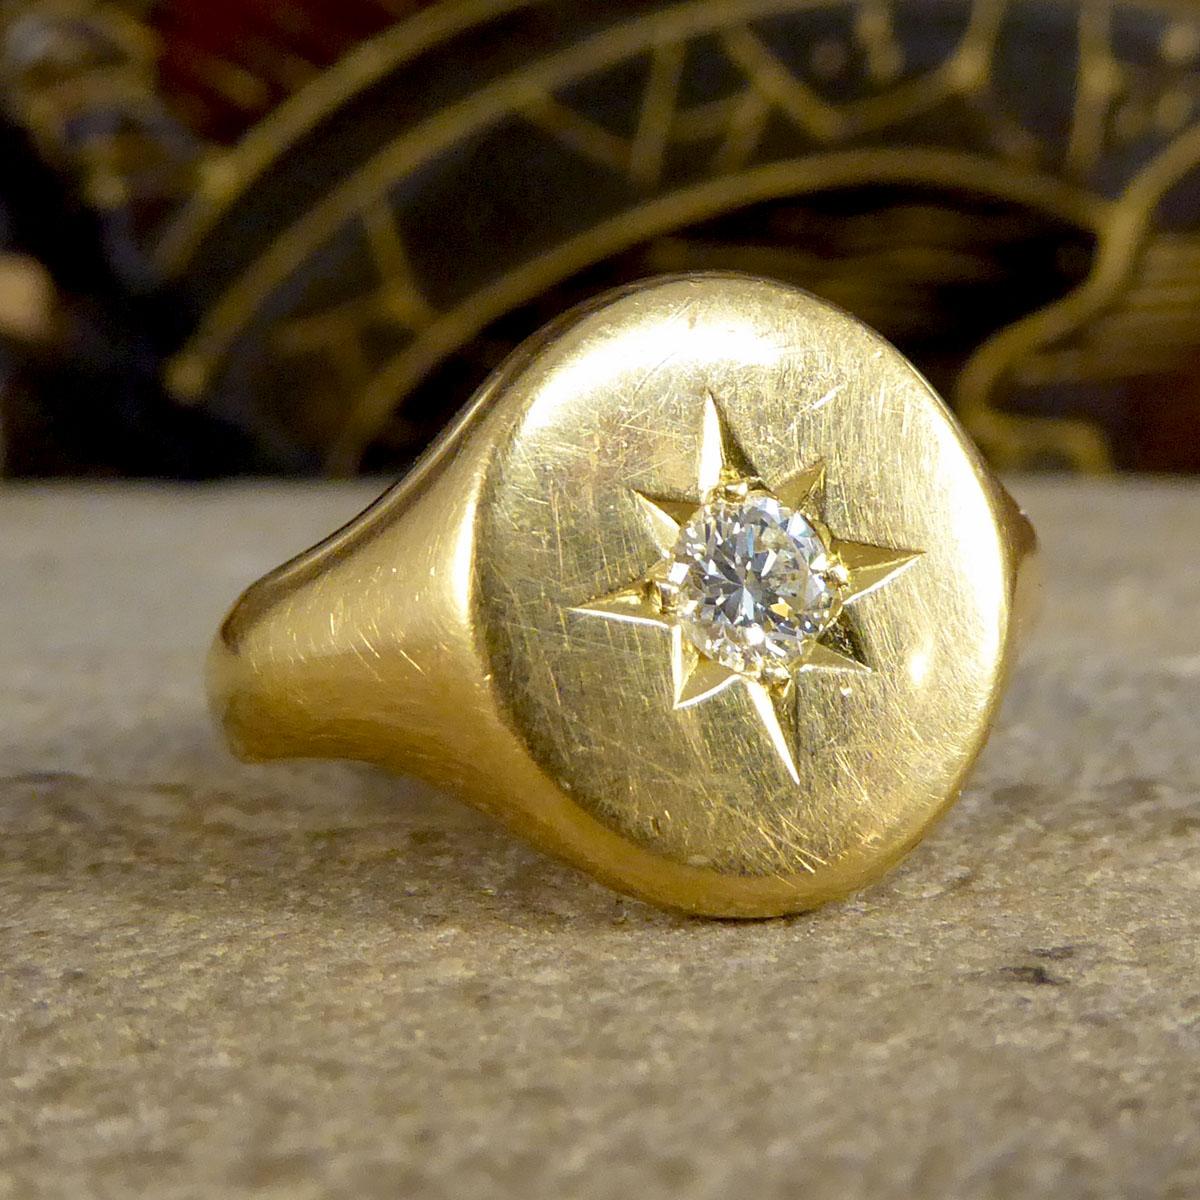 This solid Gold signet ring is oval faced with a star set Diamond in the centre weighing 0.25ct and being clear and bright. The ring has a heavy quality to it weighing 11.8g and fully crafted from 18ct Yellow Gold with an ovaled shape to it. A